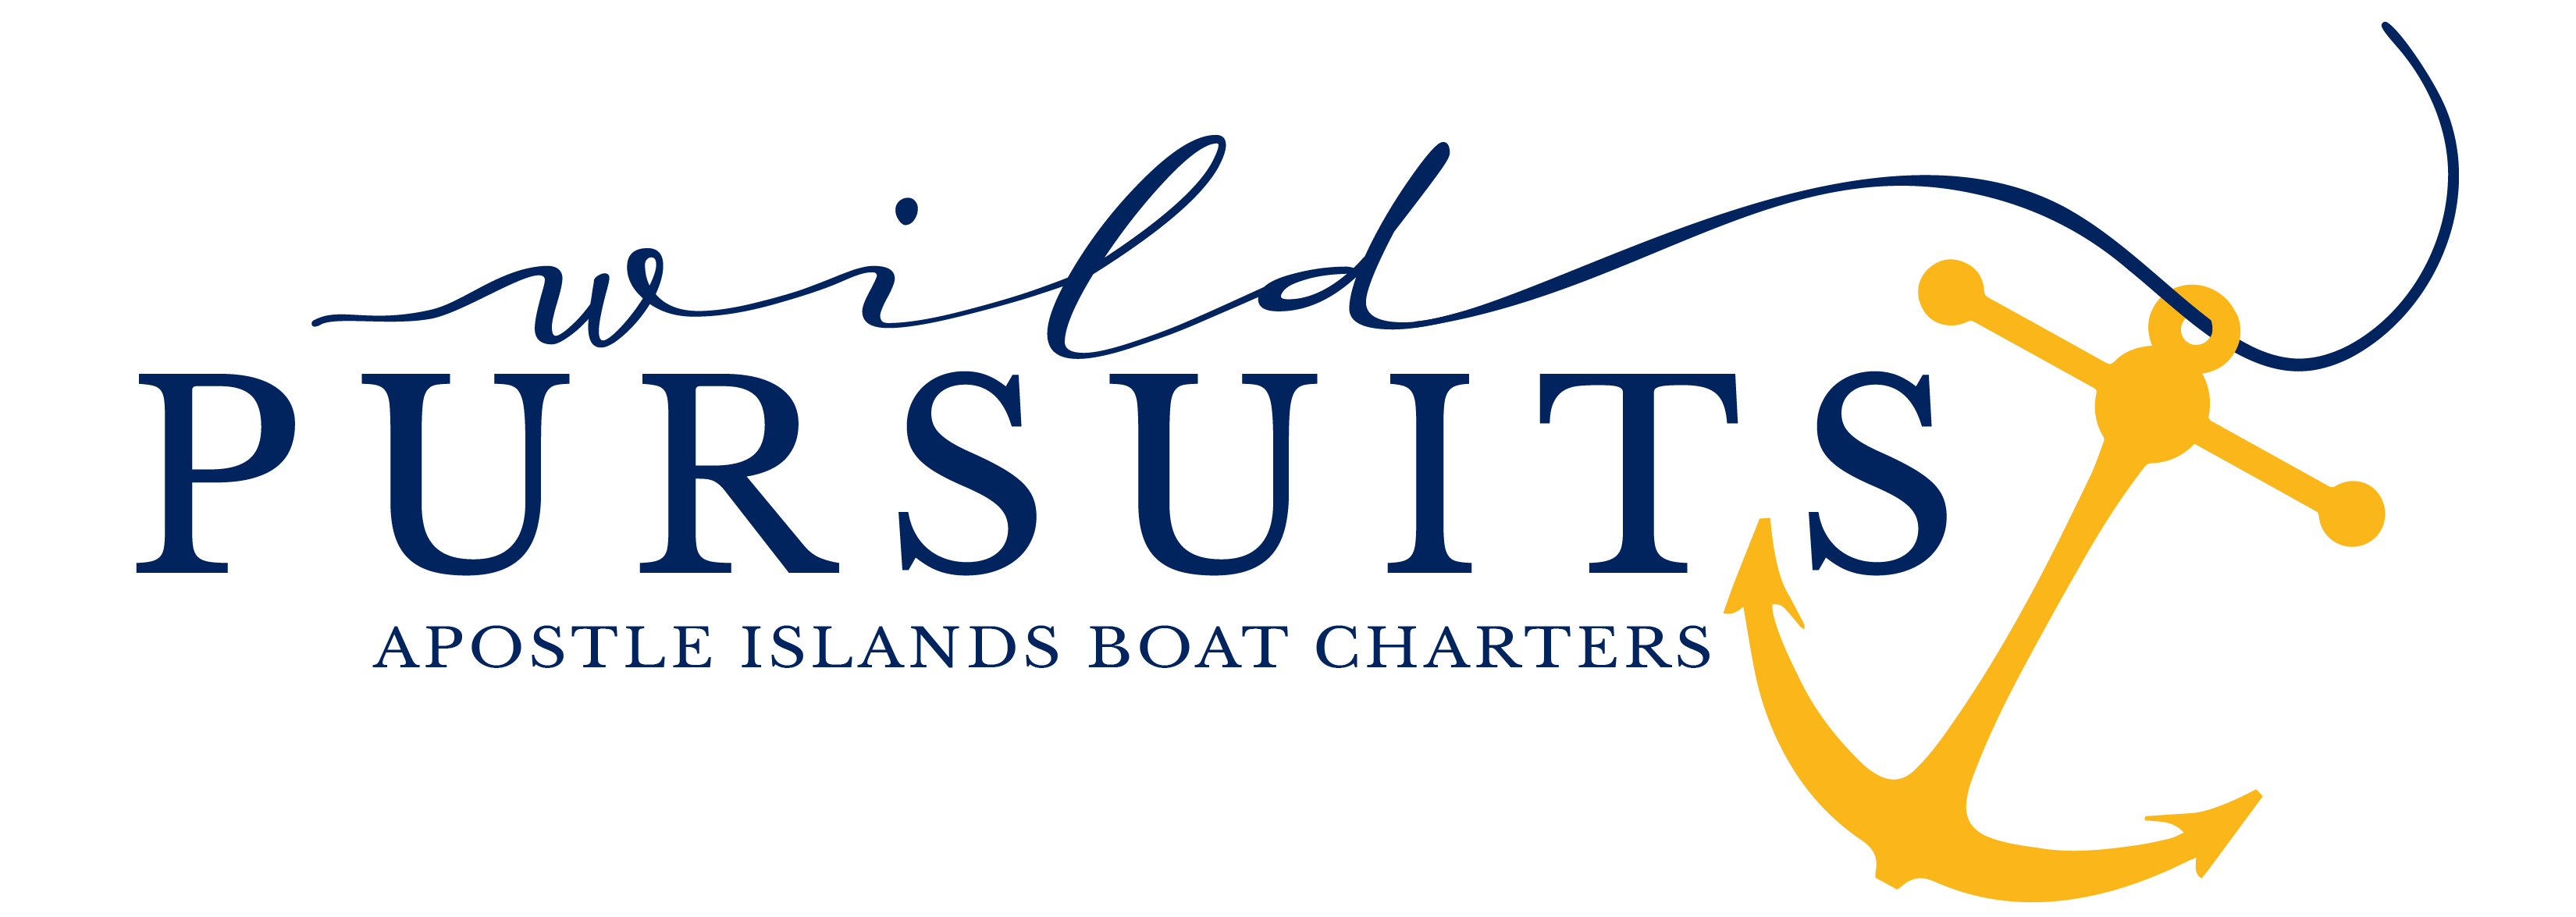 Wild Pursuits Charters